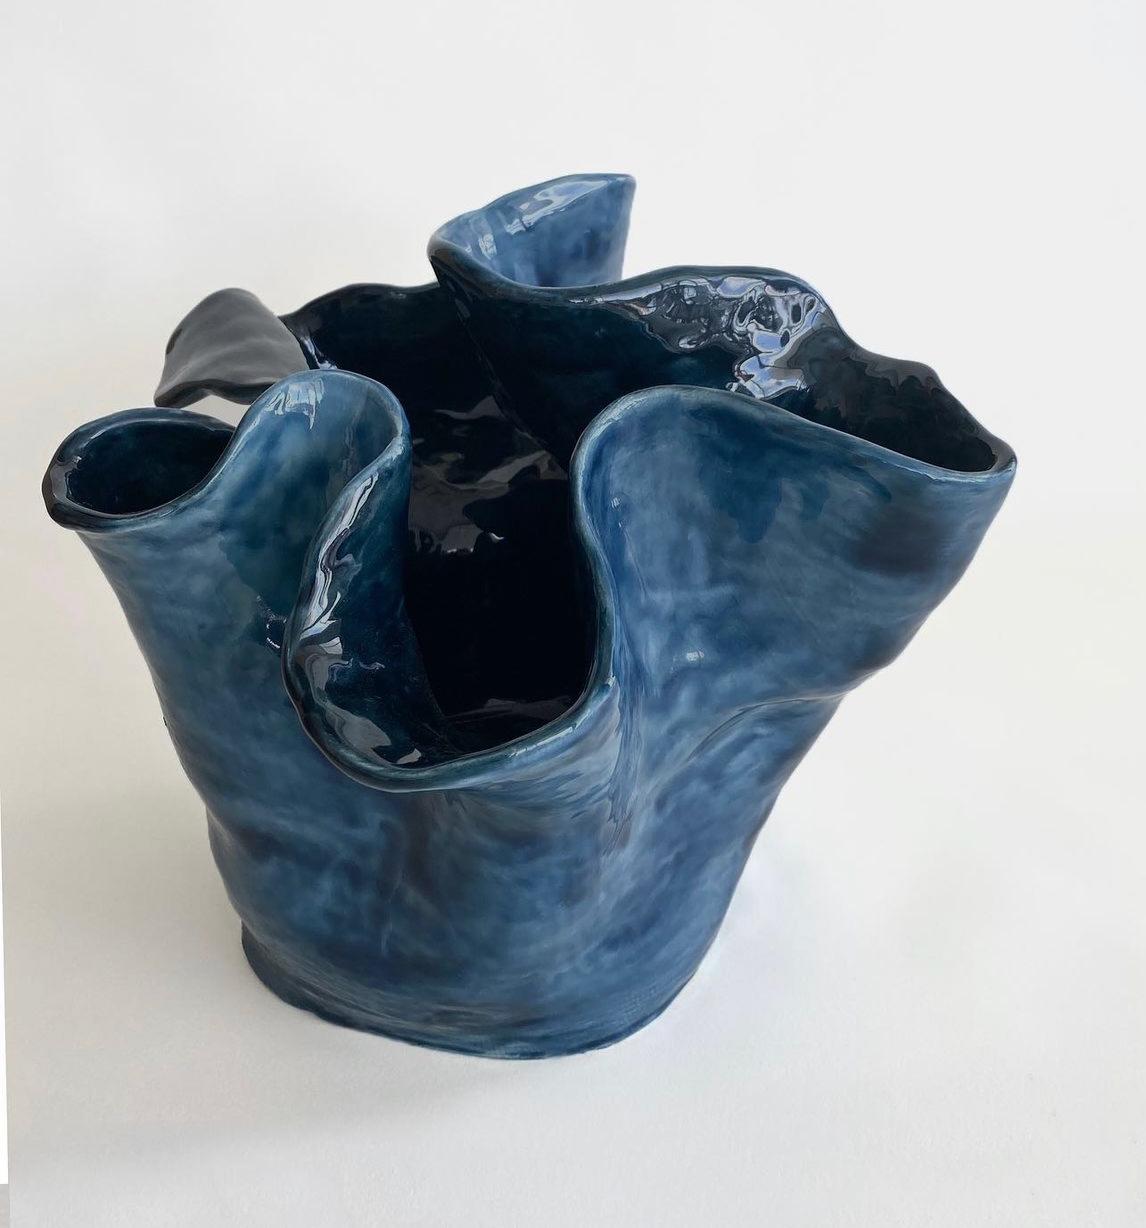 Visceral Blue, 2022 by Magda von Hanau
From the Visceral series
Clay and glass glaze
Dimensions: 11 in H x 16 in W x 13 in D
Weight 20lbs

The Visceral series delves into the intricate relationship between the mind and the body, specifically